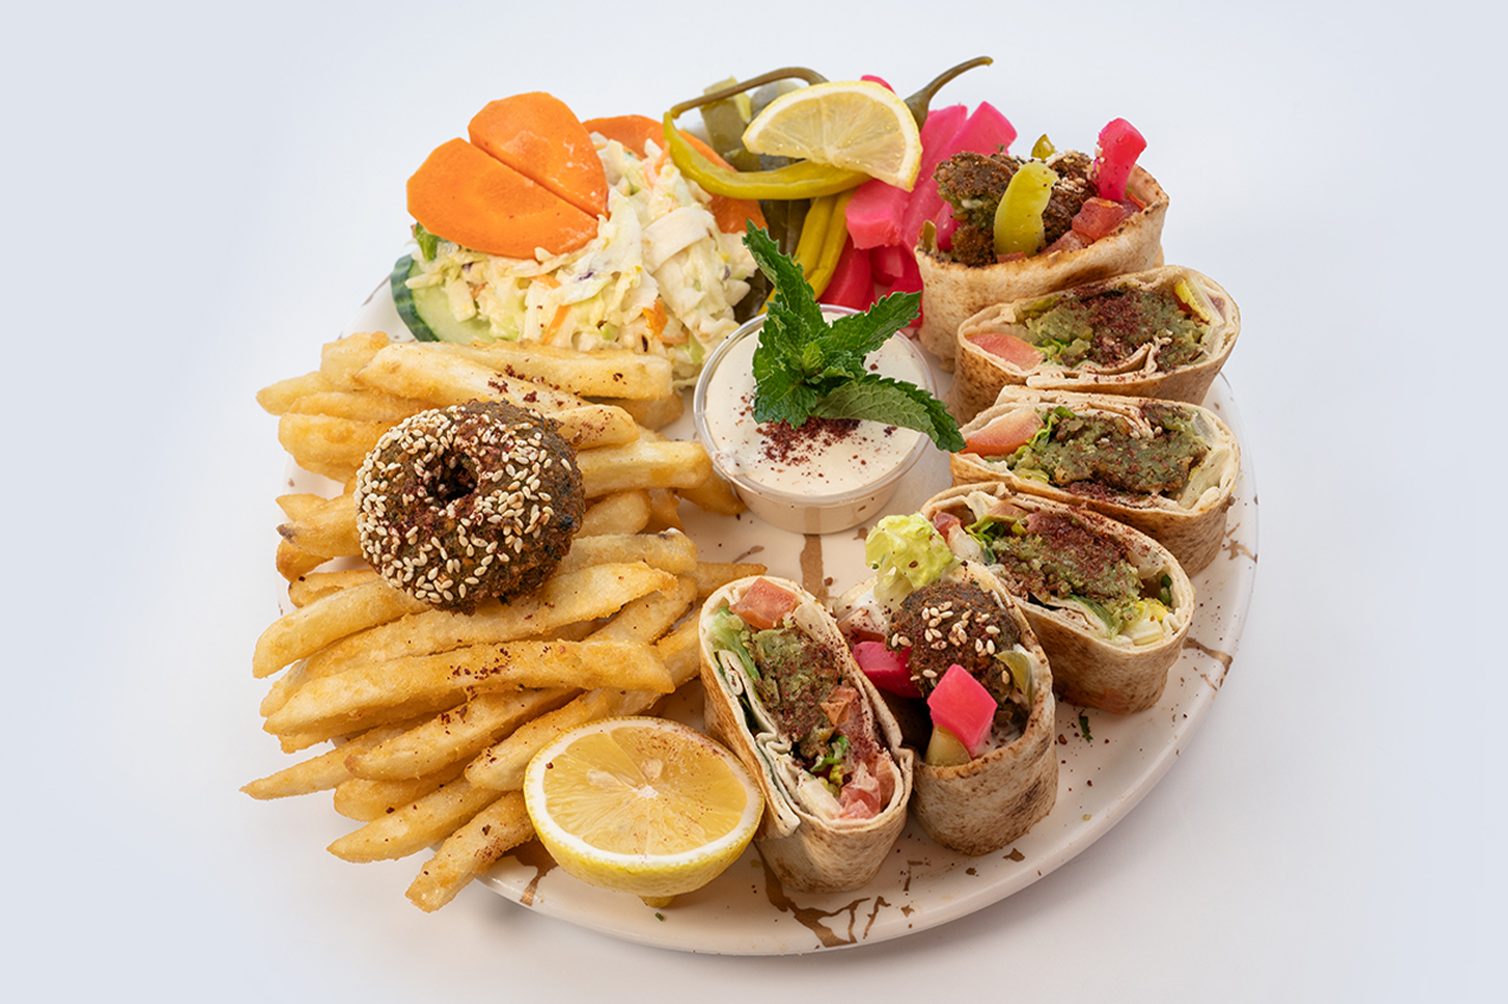 Satisfy your vegetarian cravings with Anas Vegetarian Falafel Meal. Enjoy crispy falafel paired with lettuce, tomatoes, pickles, turnips, parsley, onions, cucumbers, hummus, and tahini sauce. Complete with fries, coleslaw, pickles, turnip, and chili pepper. Explore our menu for a flavorful plant-based feast!